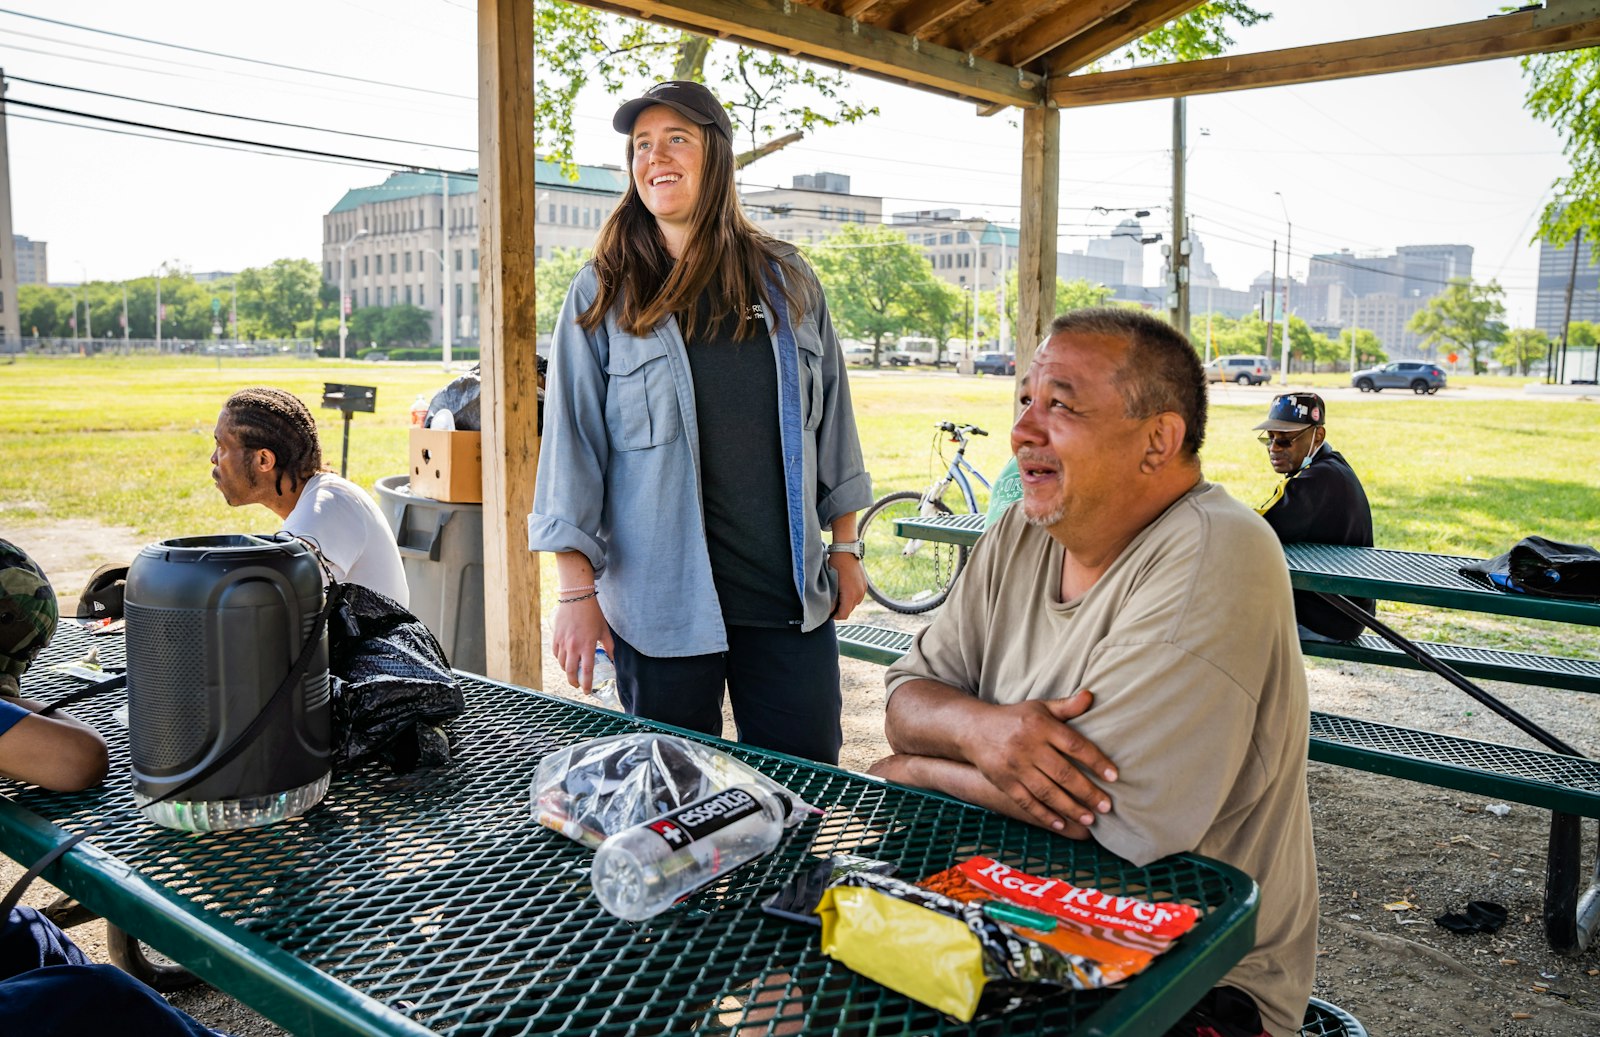 Christ in the City missionaries said their apostolate is less focused on the temporal needs of the city's poor, which remain important, but instead is focused on accompaniment and meeting the spiritual needs of the city's homeless and poor.